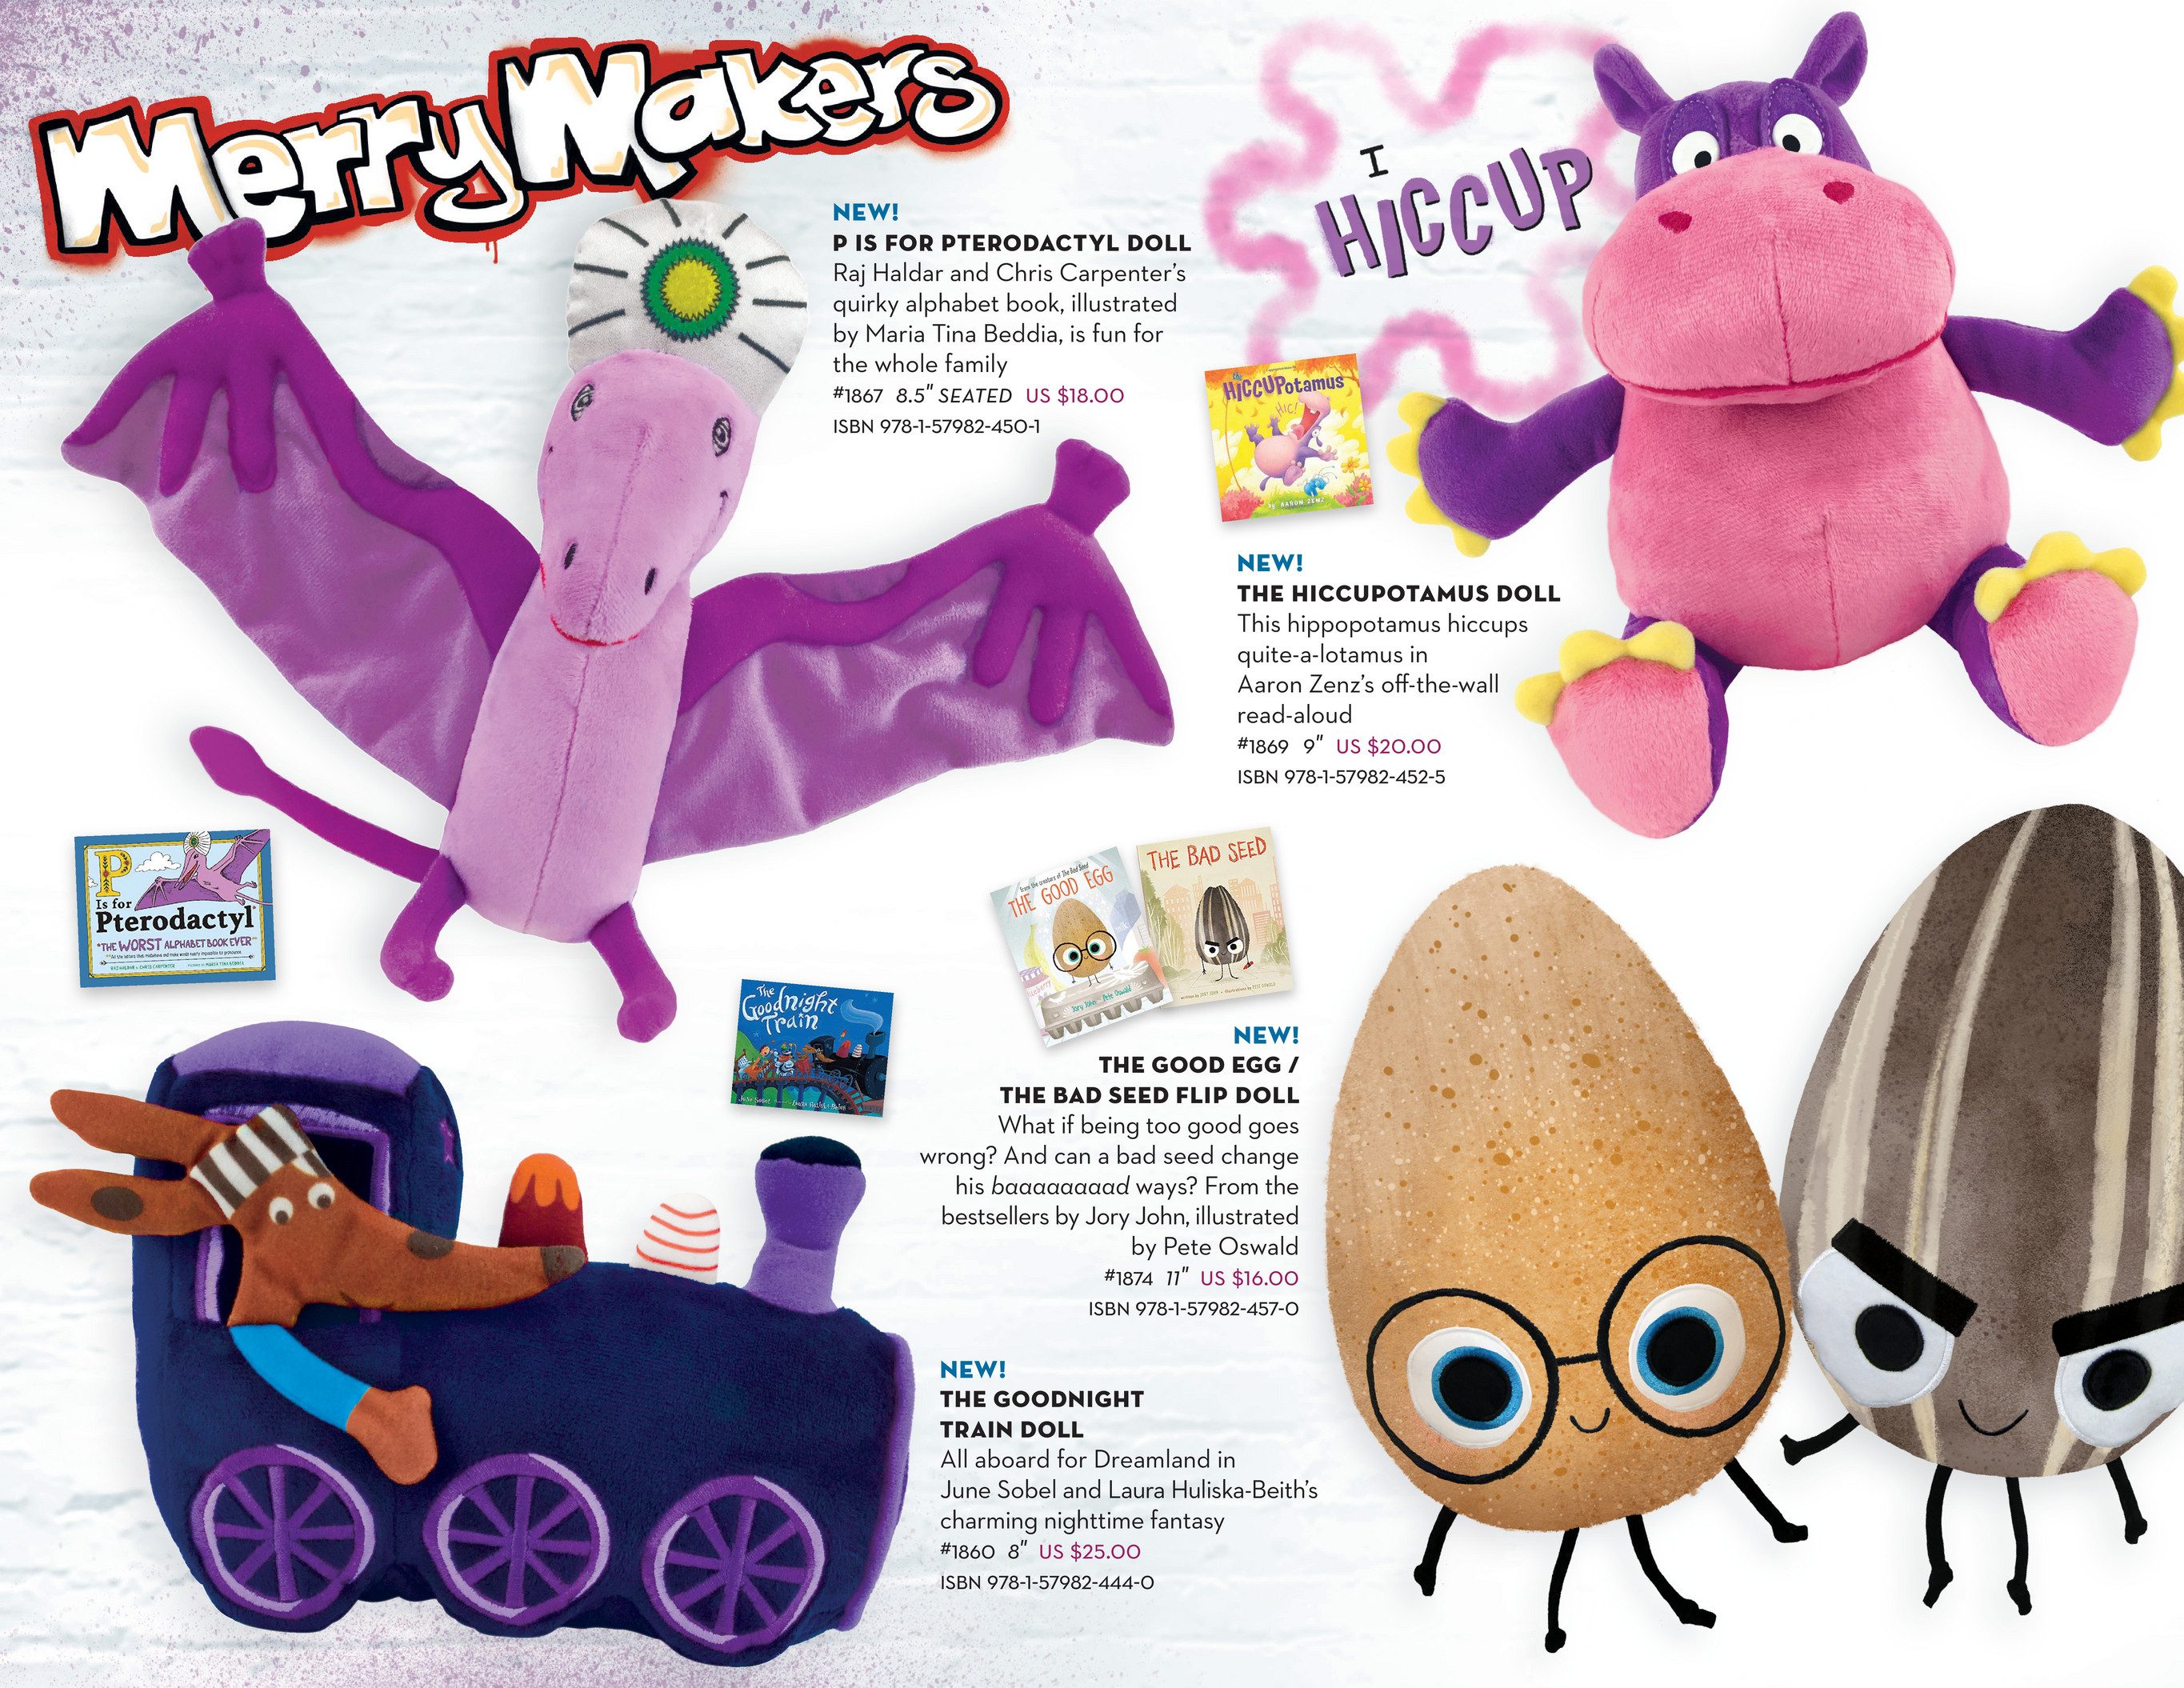 MerryMakers - 2019-2020 MerryMakers Catalog - Page 8-9